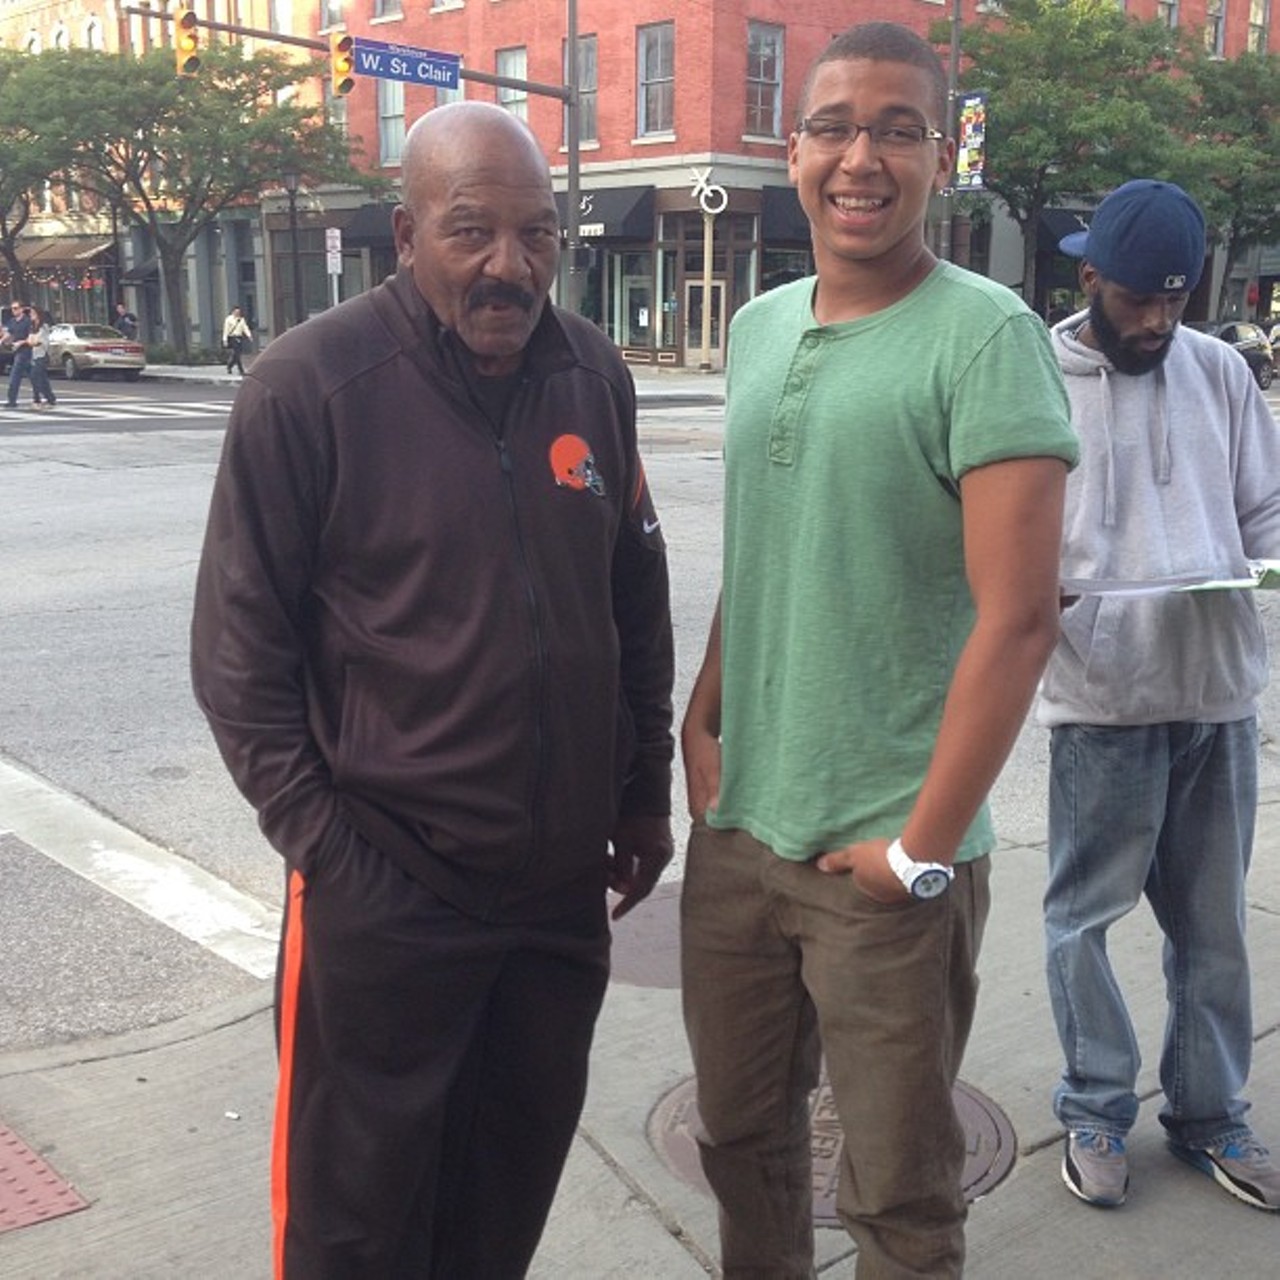 Just saw the legendary Jim Brown at Bar Louie, just nonchalantly walking down the street. No big deal or anything, just one of the first (and greatest) African-American football players that ever played for the Browns. This man STILL has records that are now around 50 years old that have YET to be broken. In other words, this man is SWAG ITSELF. #jimbrown #clevelandbrowns #browns #clevelandproblems